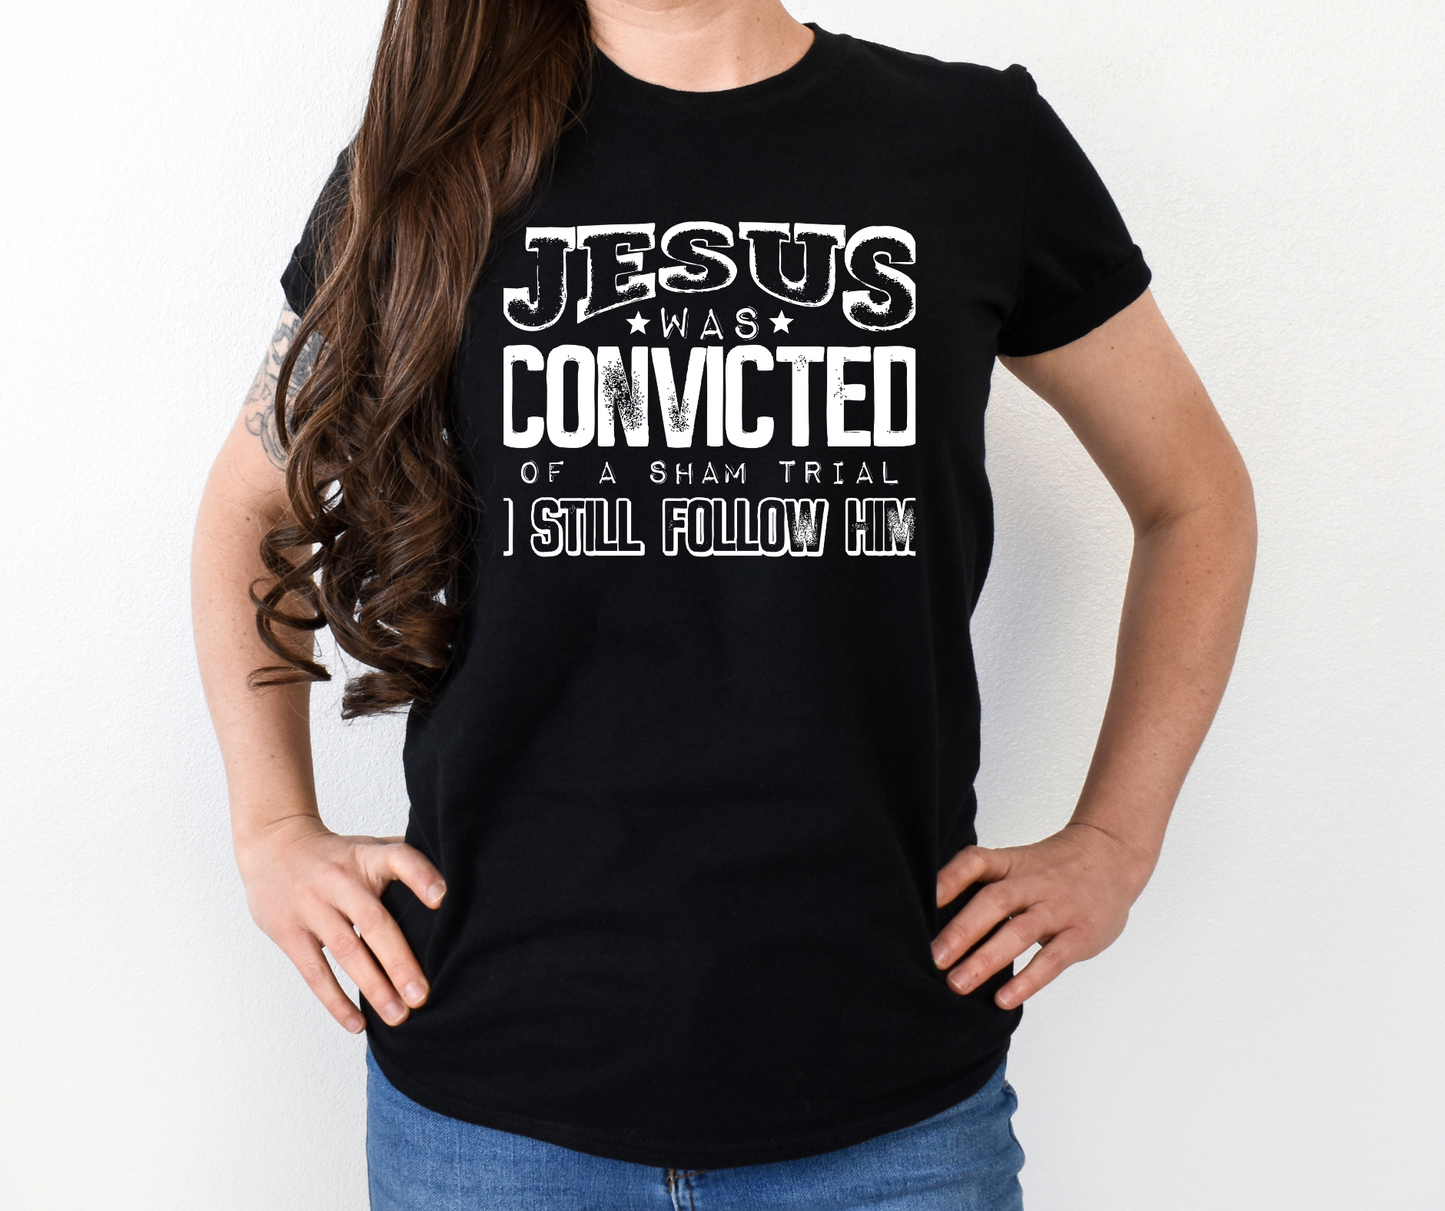 Jesus Was Convicted White - DTF